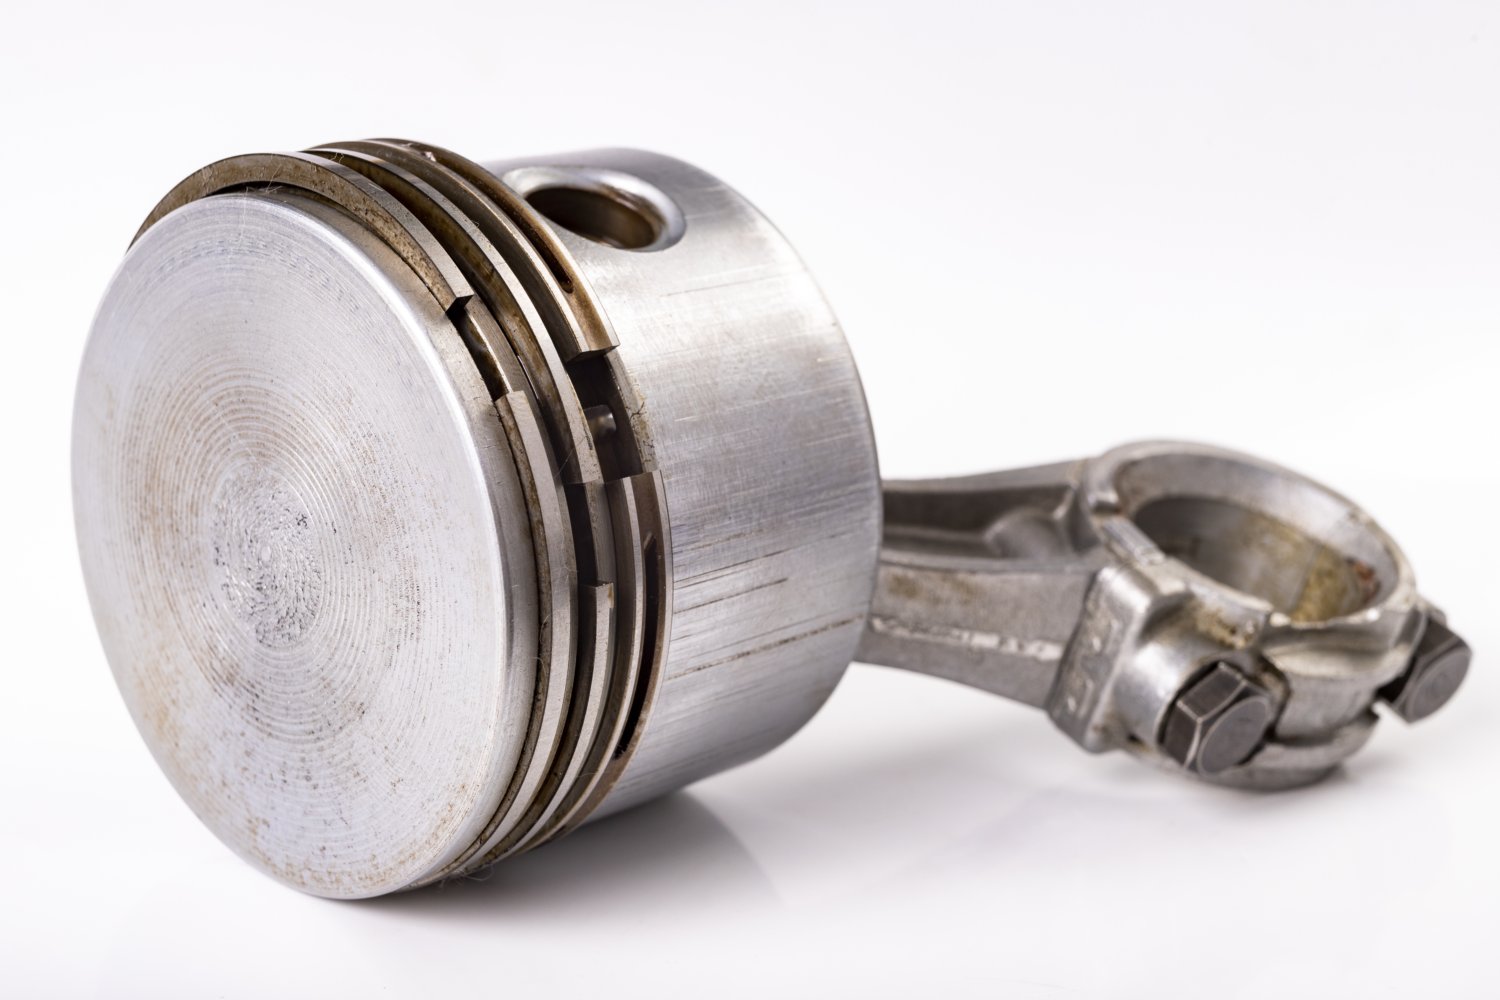 Piston and connecting rod of a small internal combustion engine. Spare parts for engine repair and regeneration. Light background.